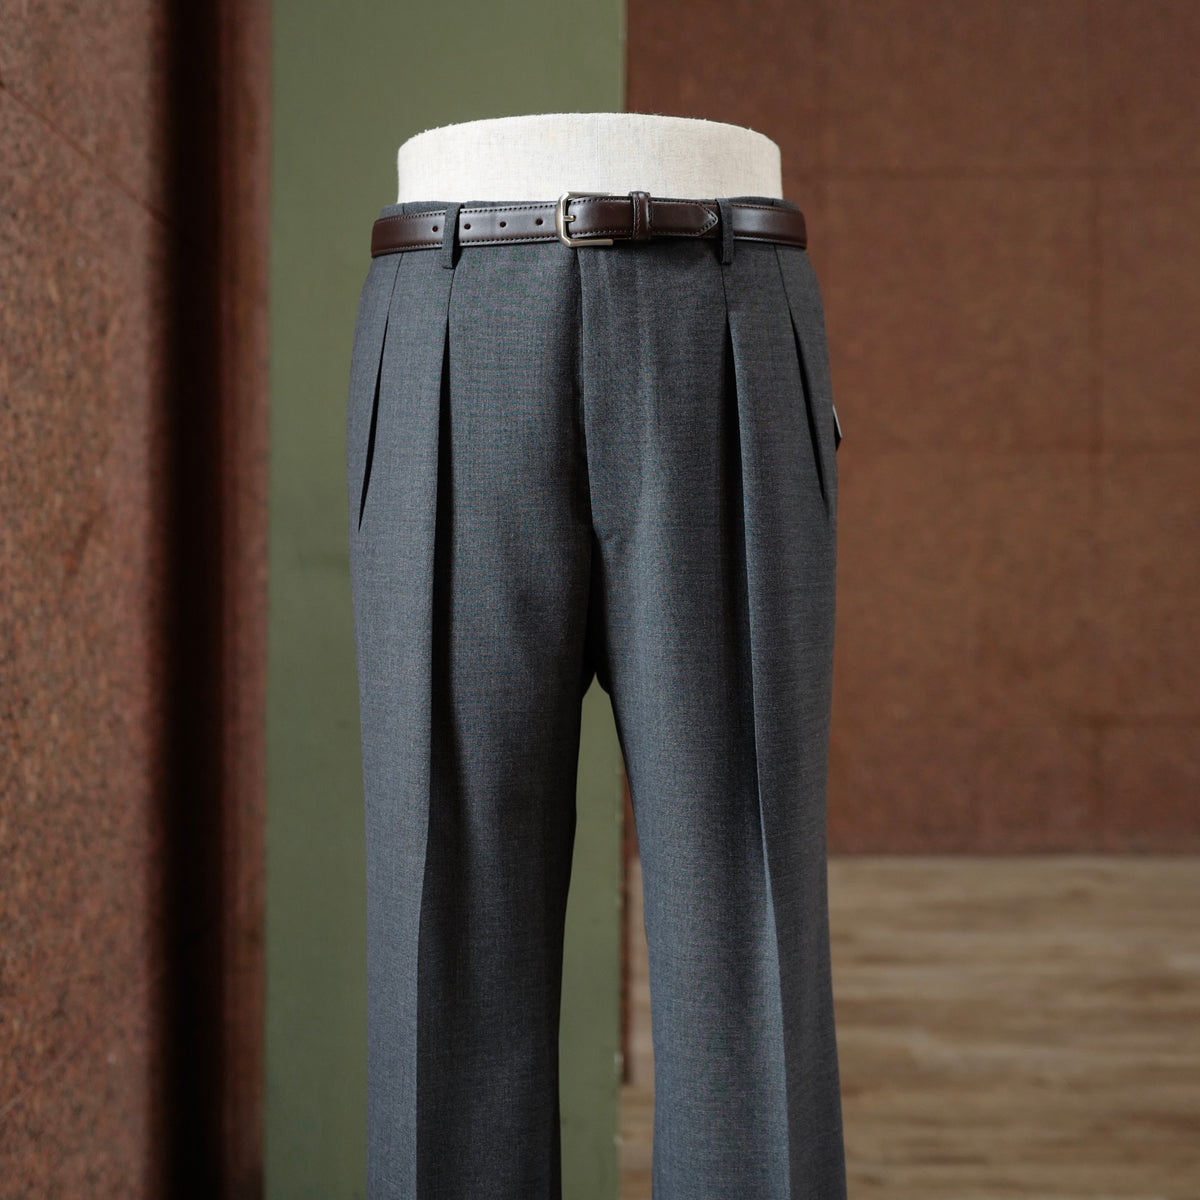 Hollywood trousers. Pleated, and wool. Too dressy? or just right